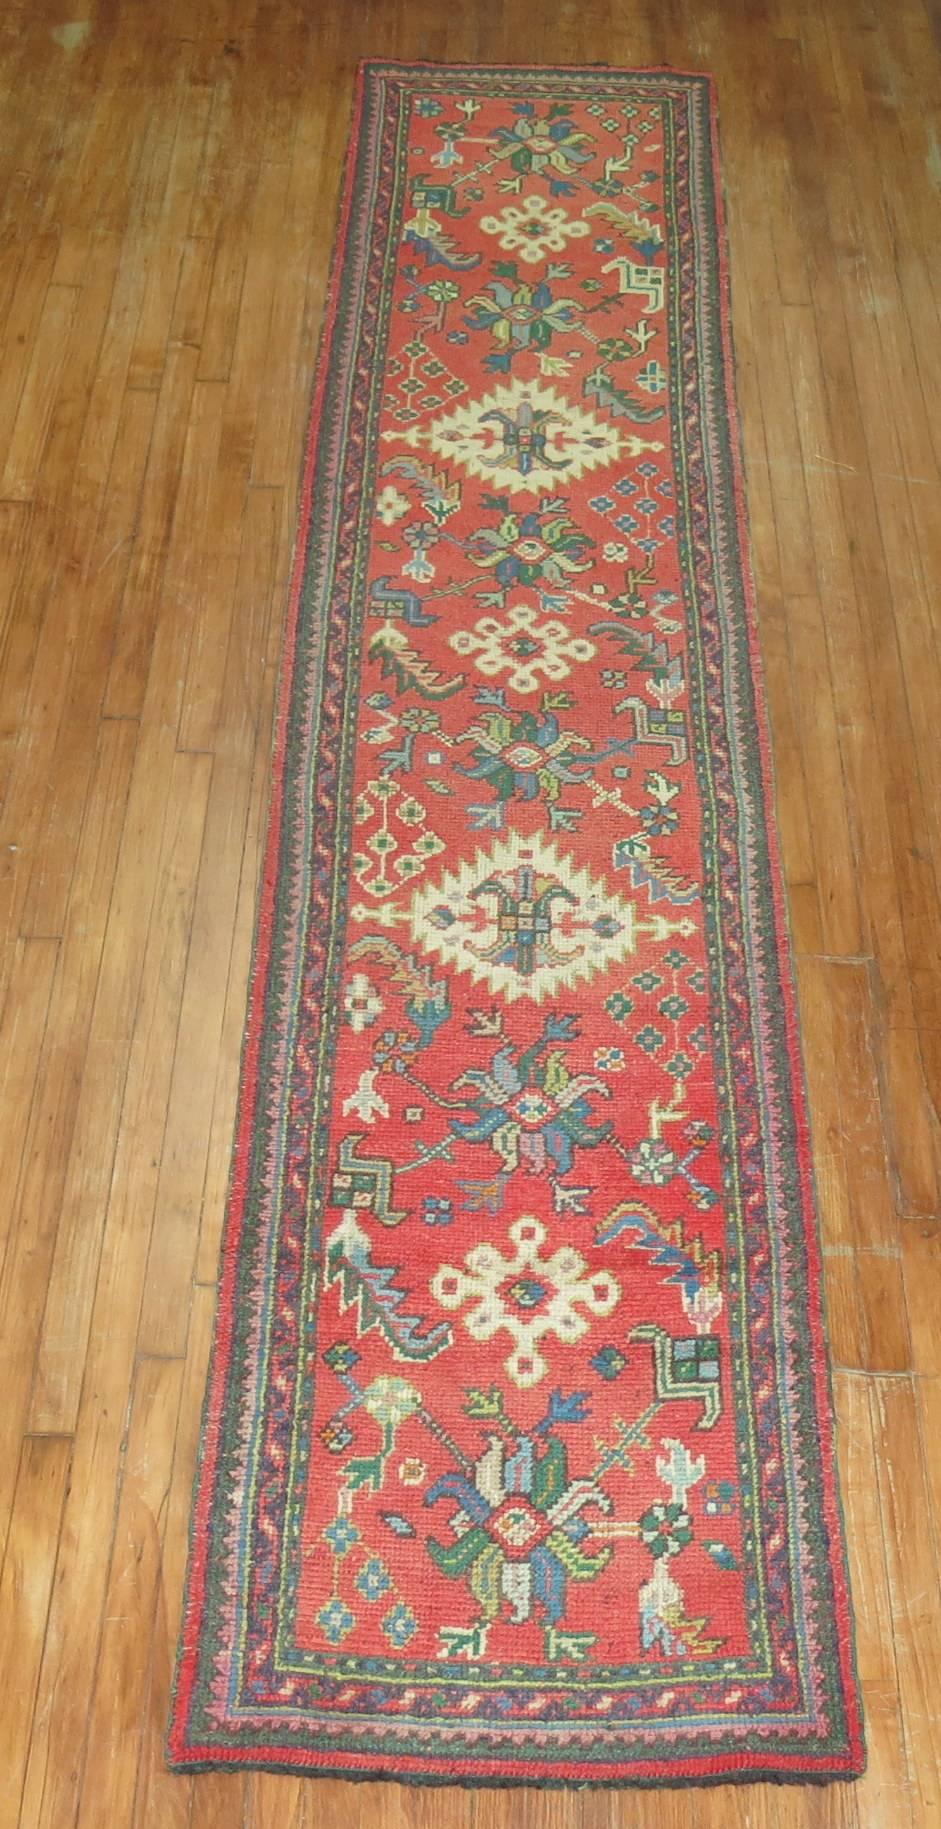 Authentic antique Turkish Oushak runner in predominant tomato red, accents in green, blue and beige

Measures: 2'5